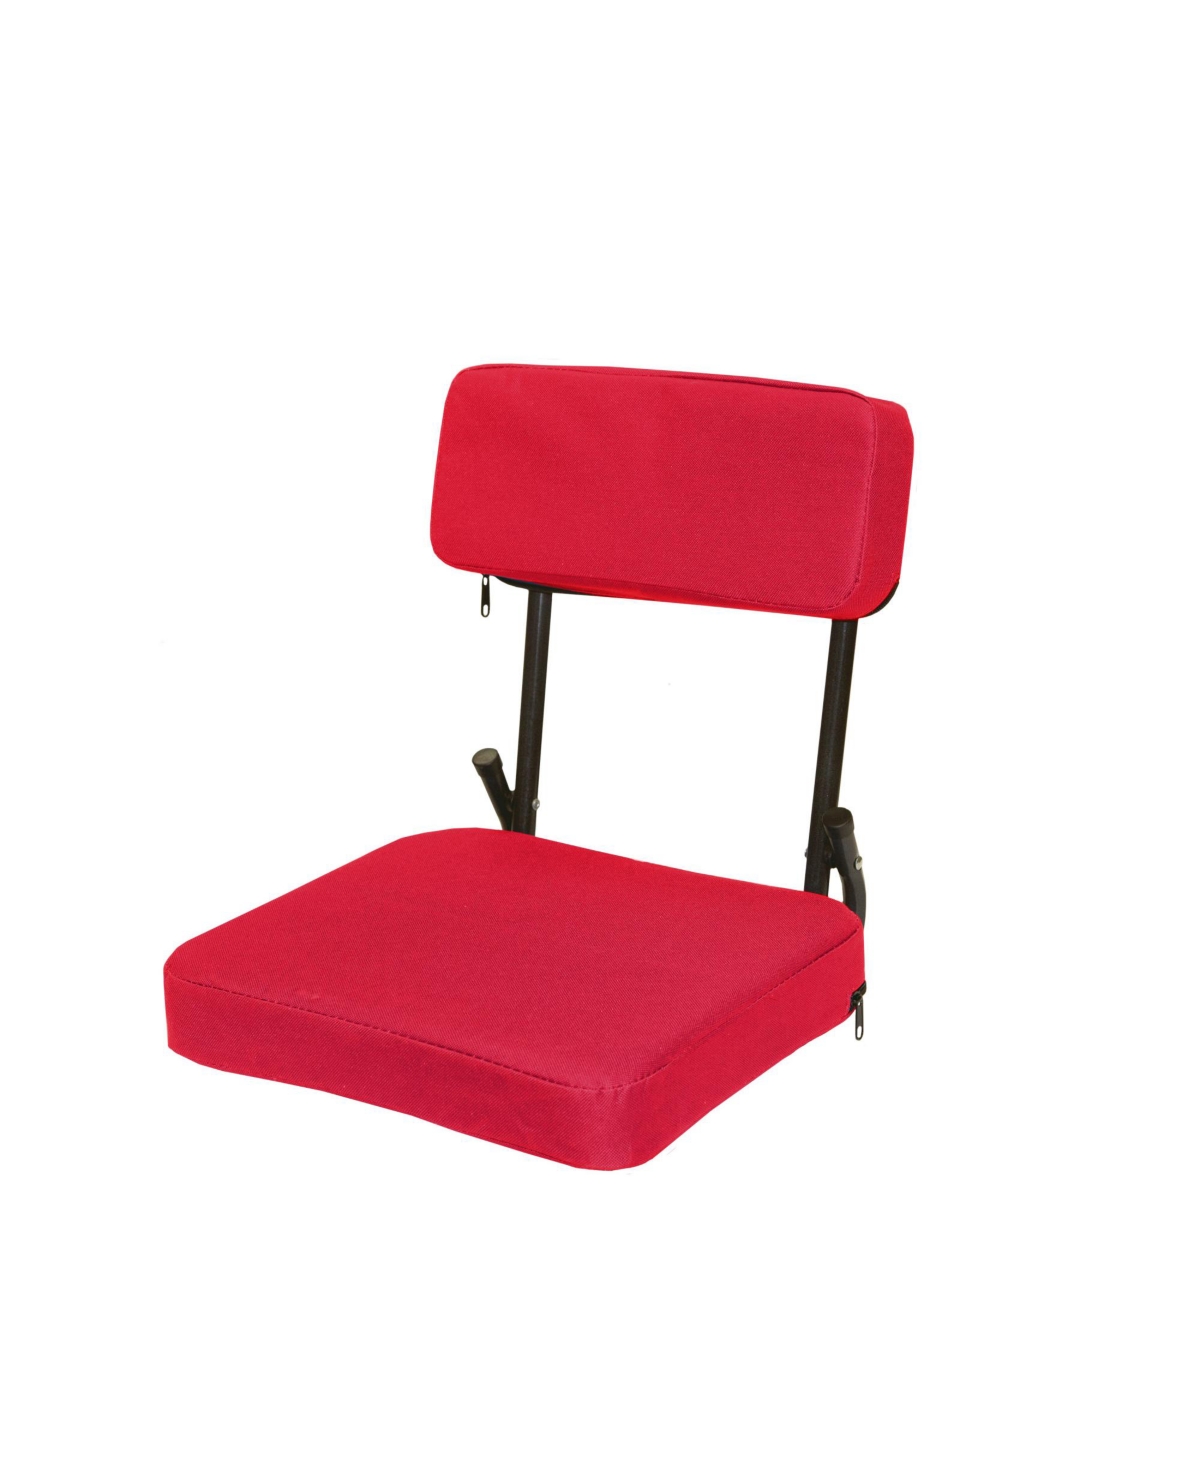 Coliseum Seat - Red - Red